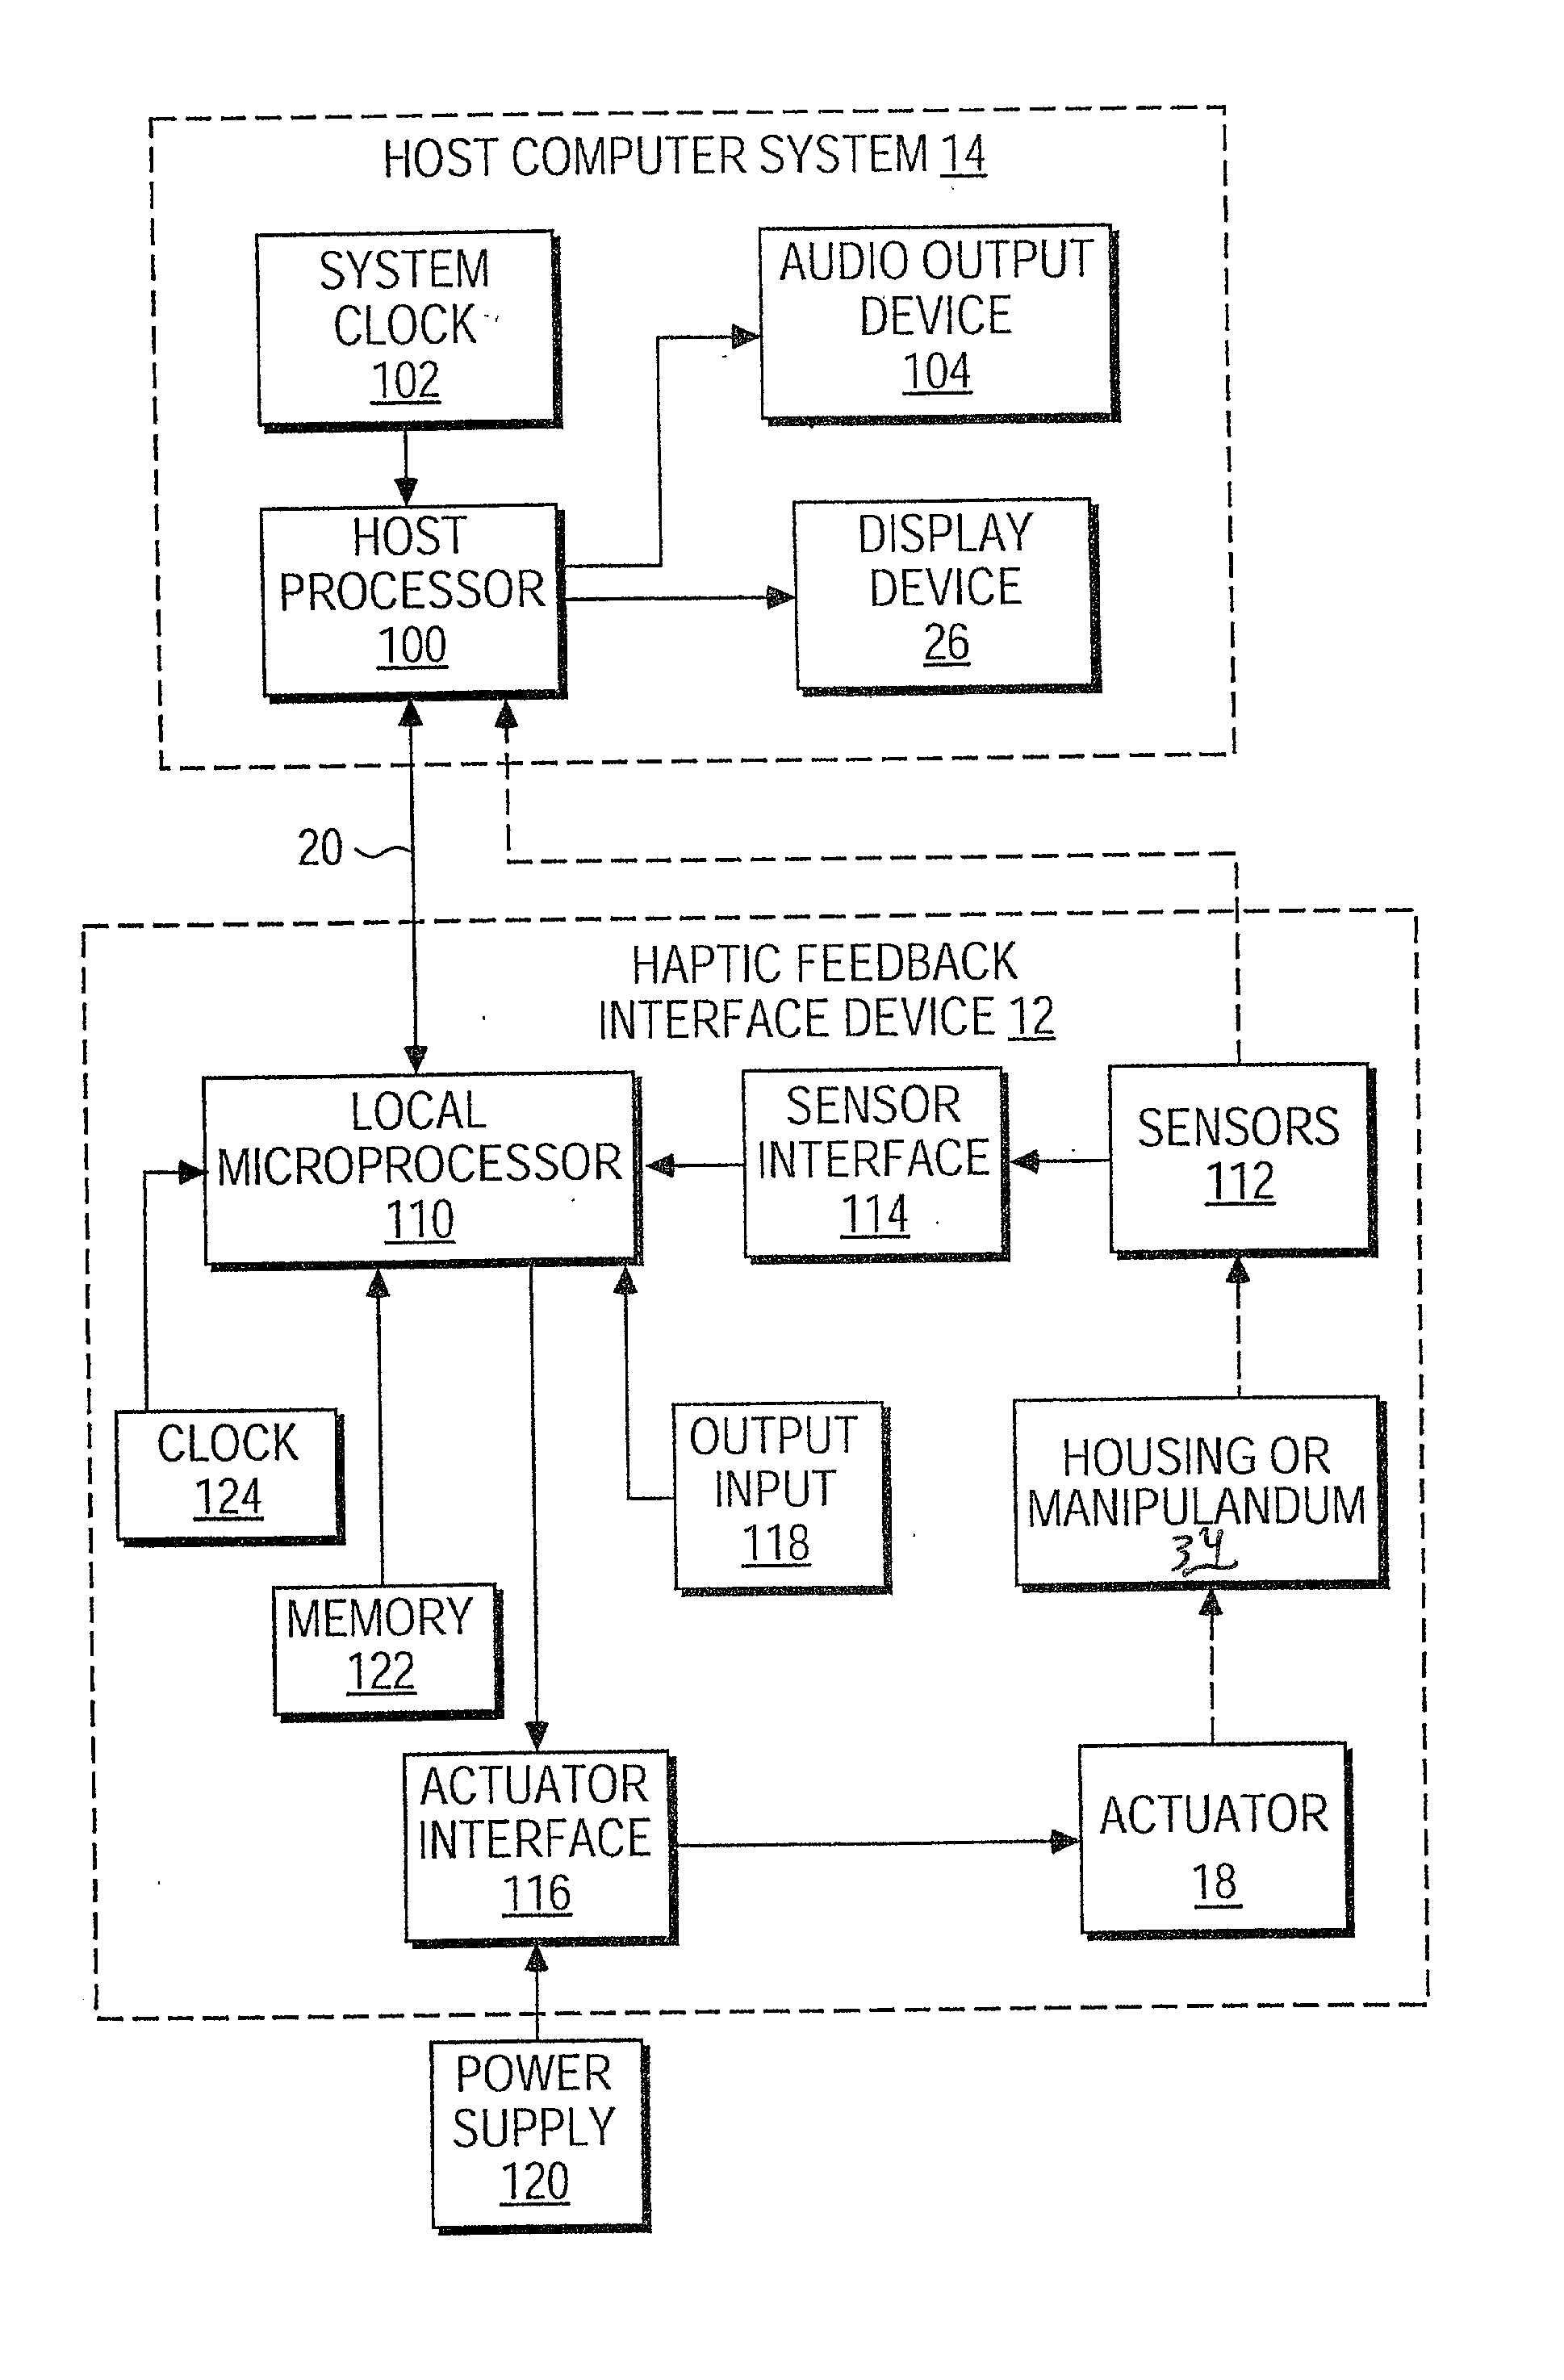 Actuator thermal protection in haptic feedback devices